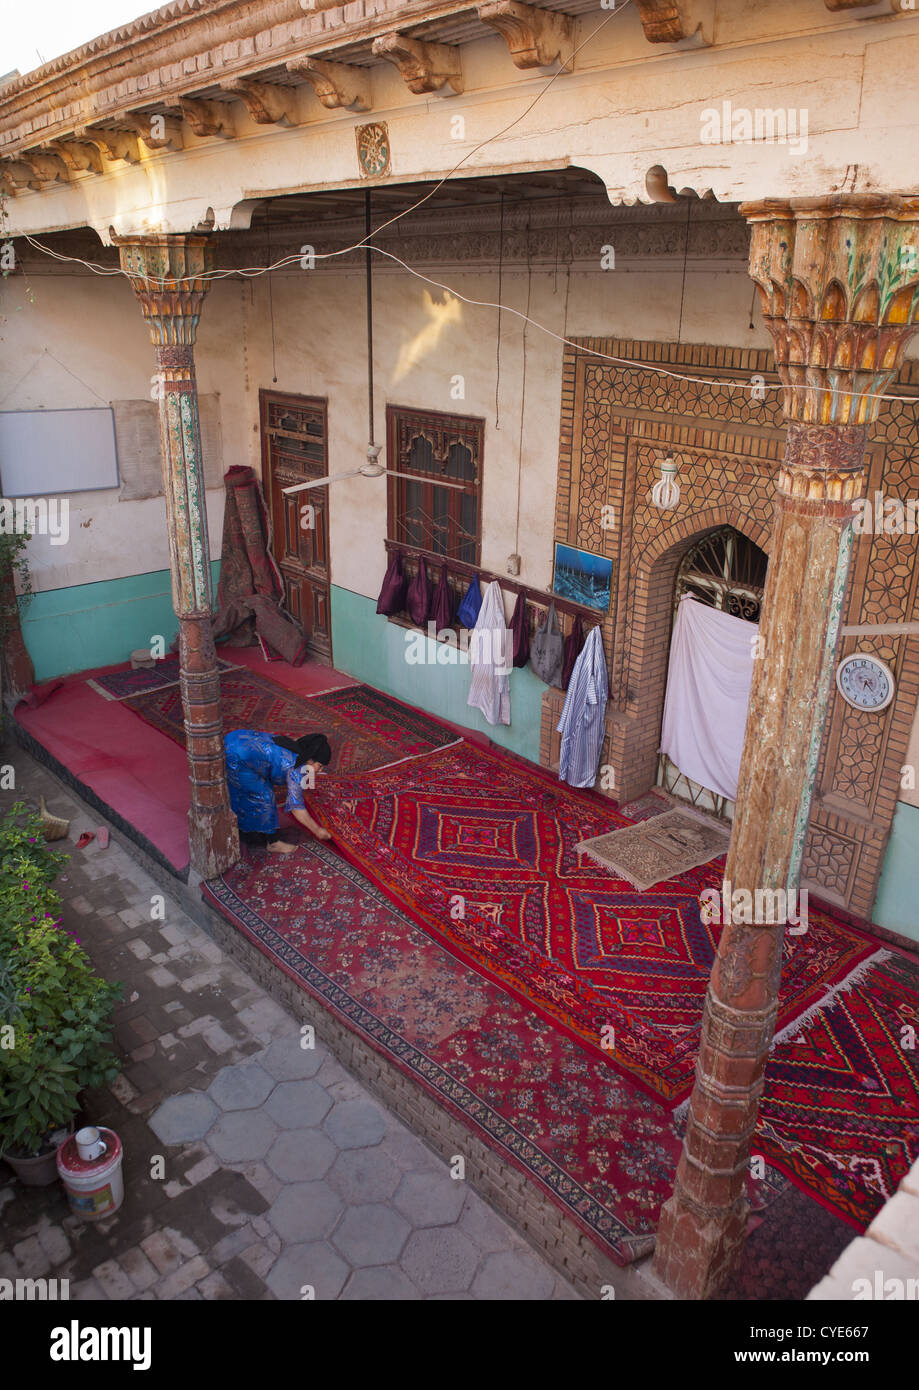 Uygur Woman Uncoiling The Carpets Of A Mosque, Old Town Of Kashgar, Xinjiang  Uyghur Autonomous Region, China Stock Photo - Alamy